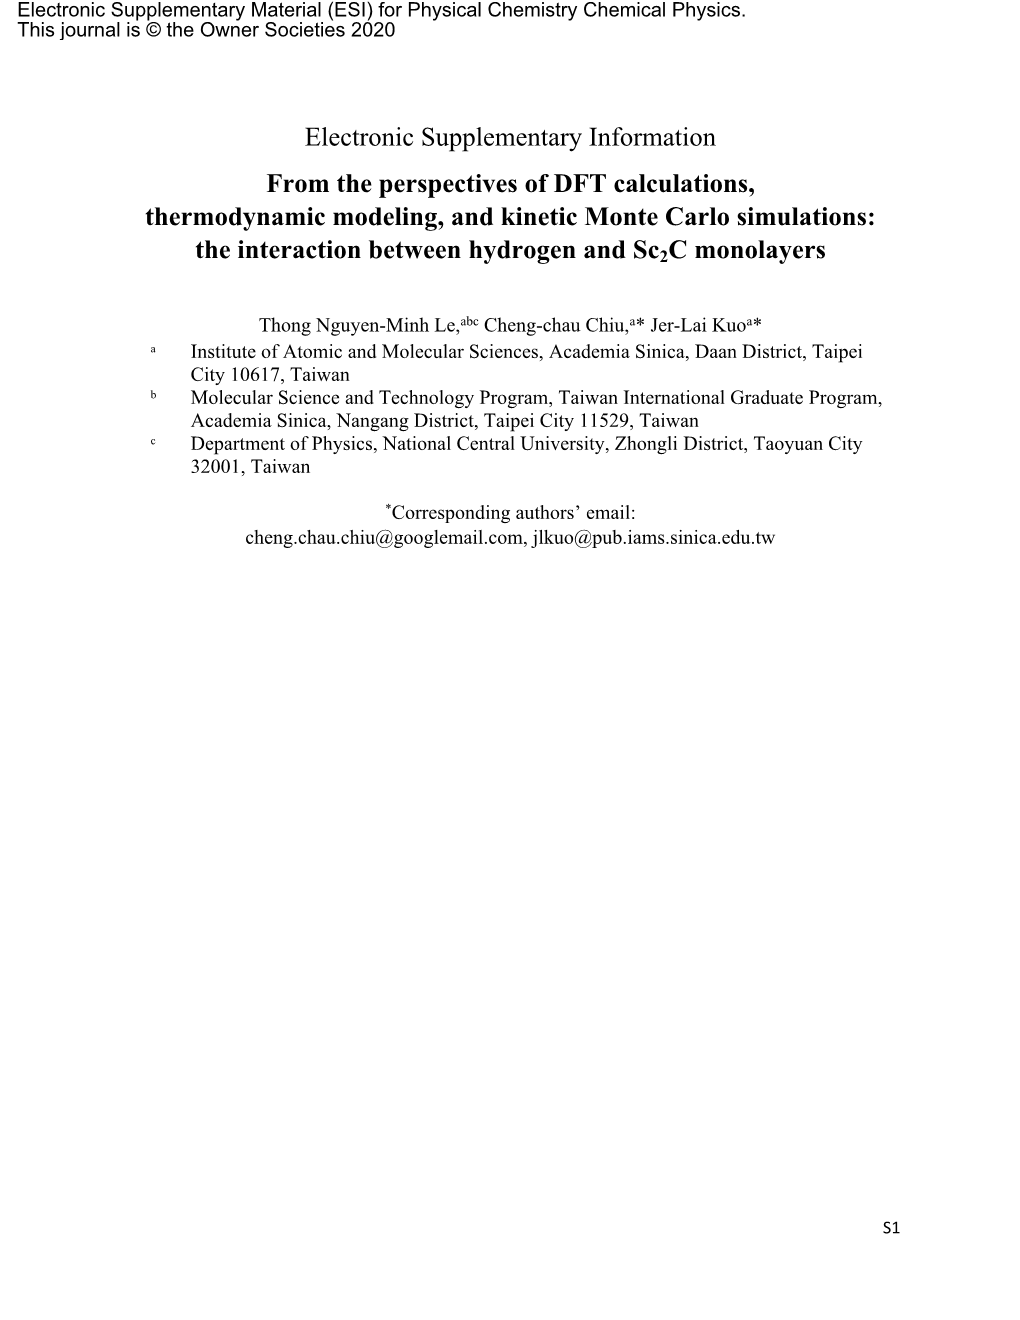 Electronic Supplementary Information from the Perspectives of DFT Calculations, Thermodynamic Modeling, and Kinetic Monte Carlo Simulations